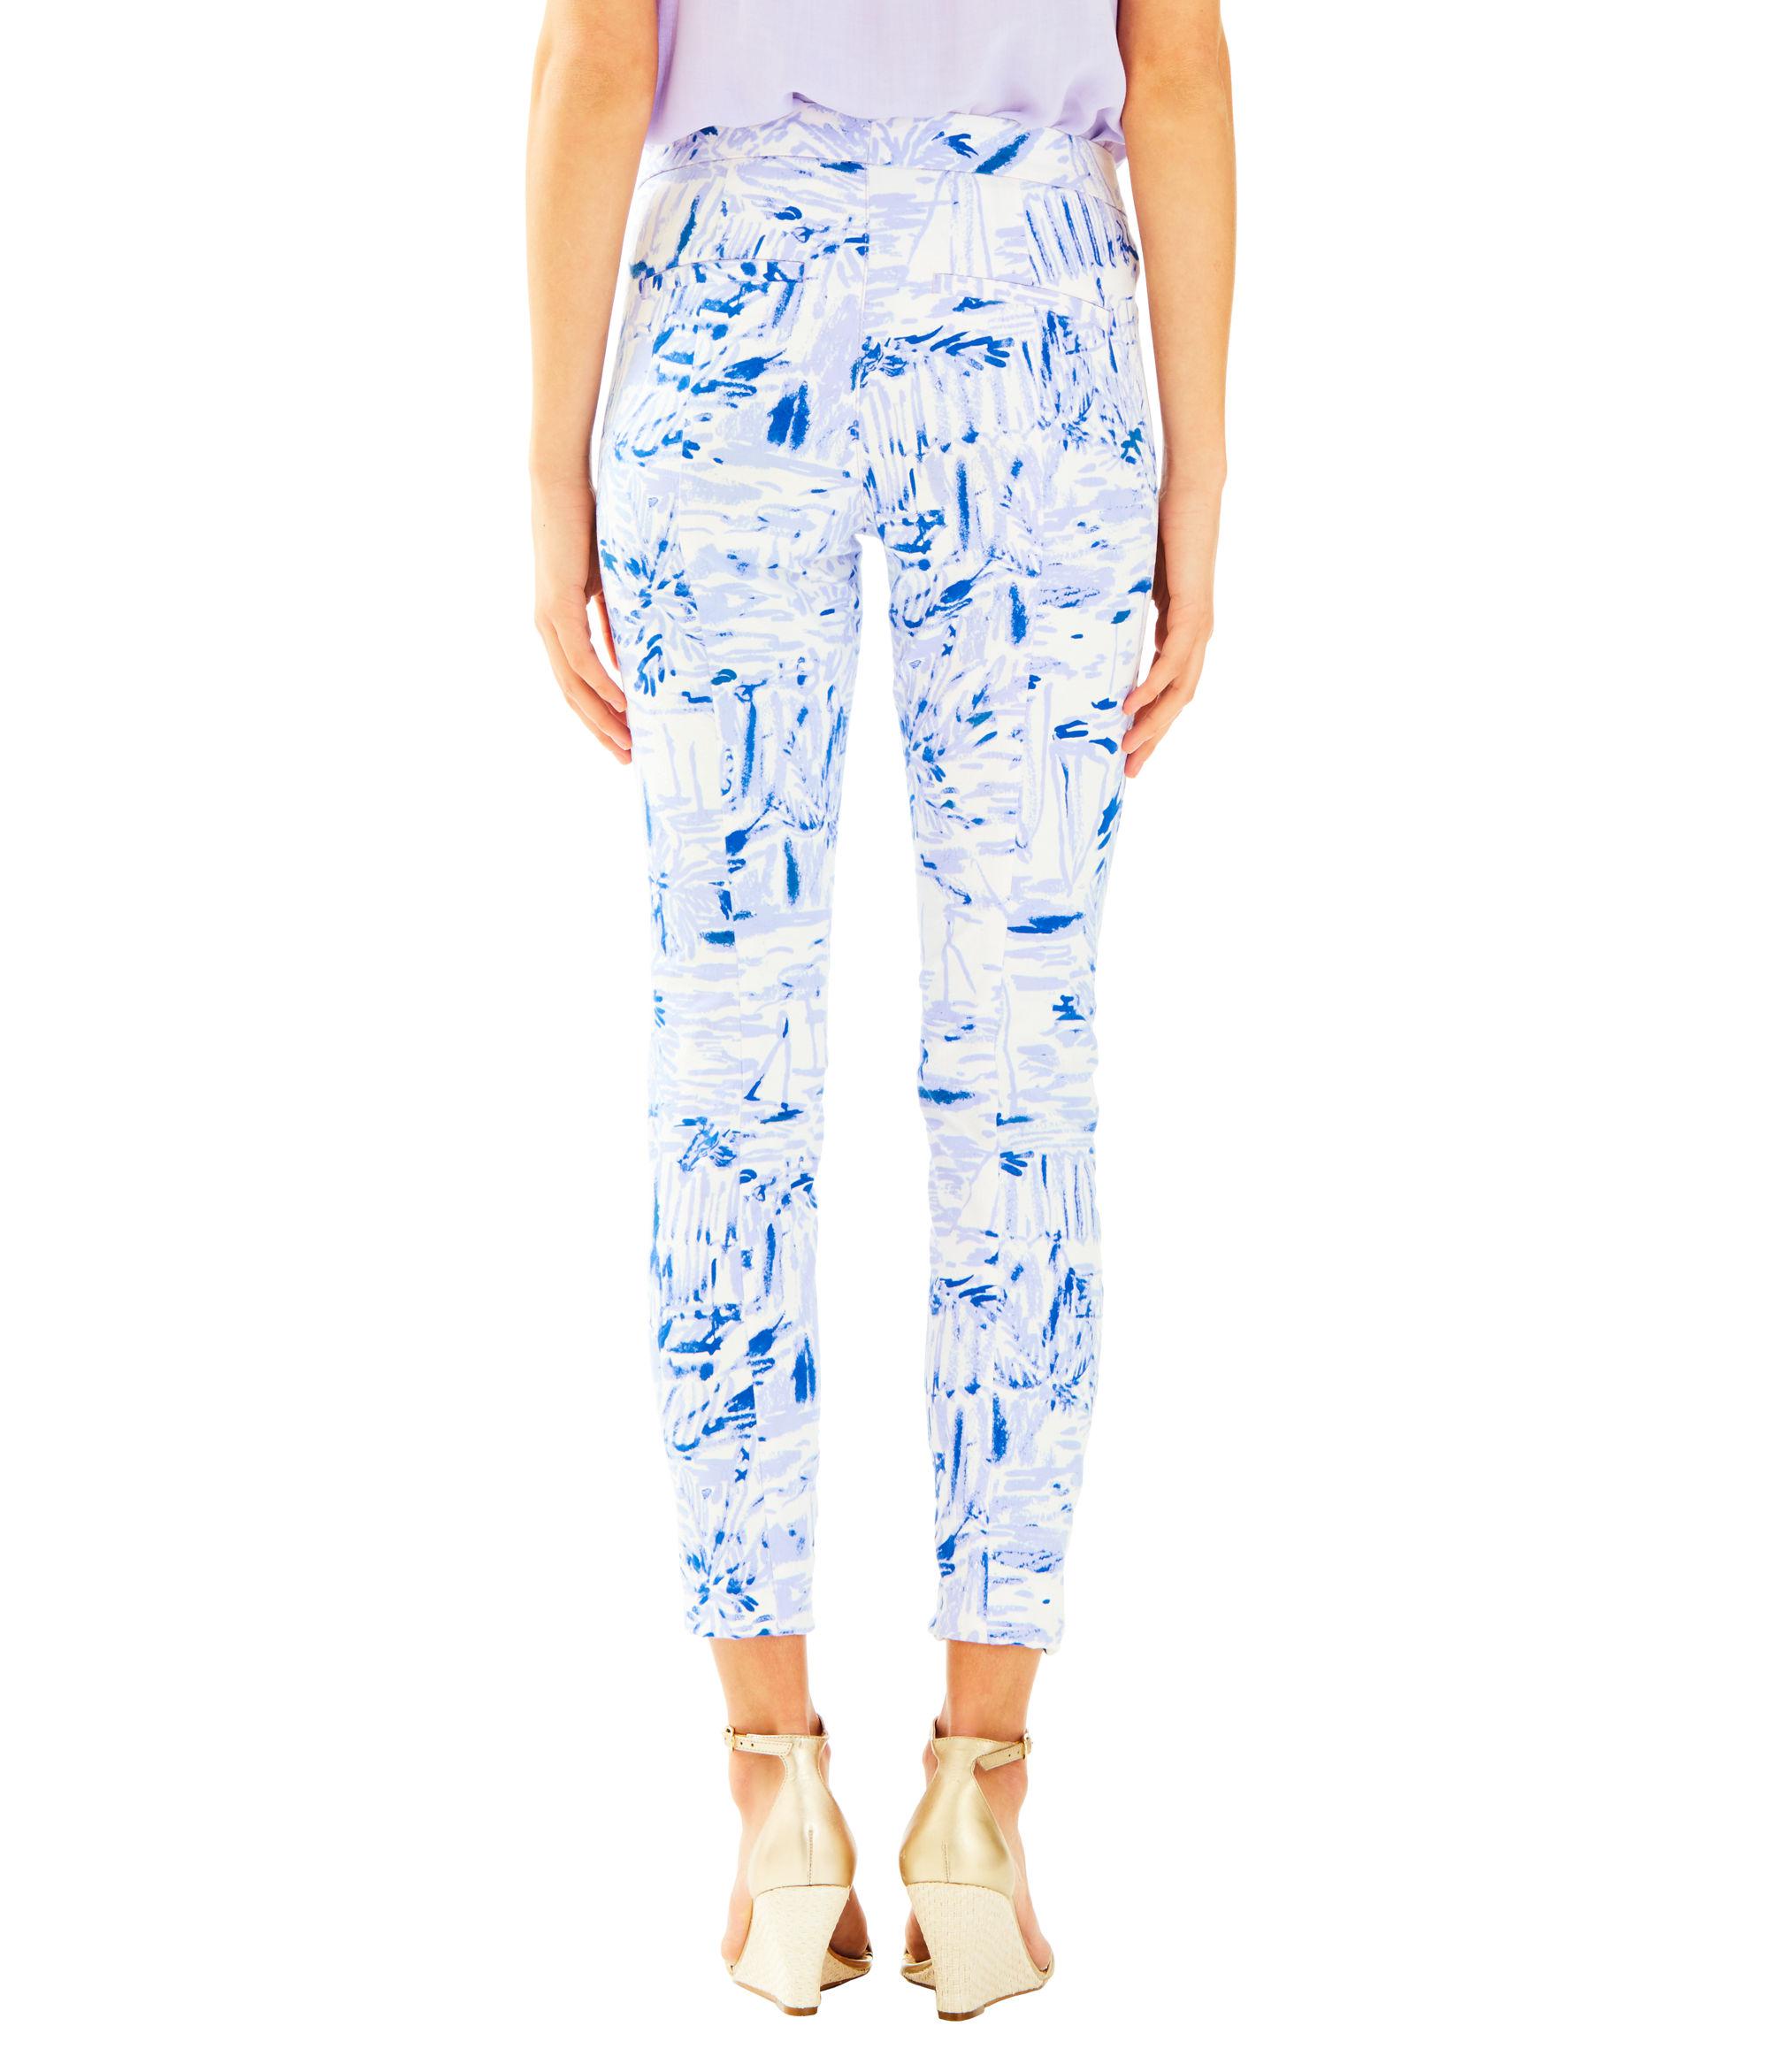 Lyst - Lilly Pulitzer 29" Kelly Ankle Length Skinny Pant in Blue